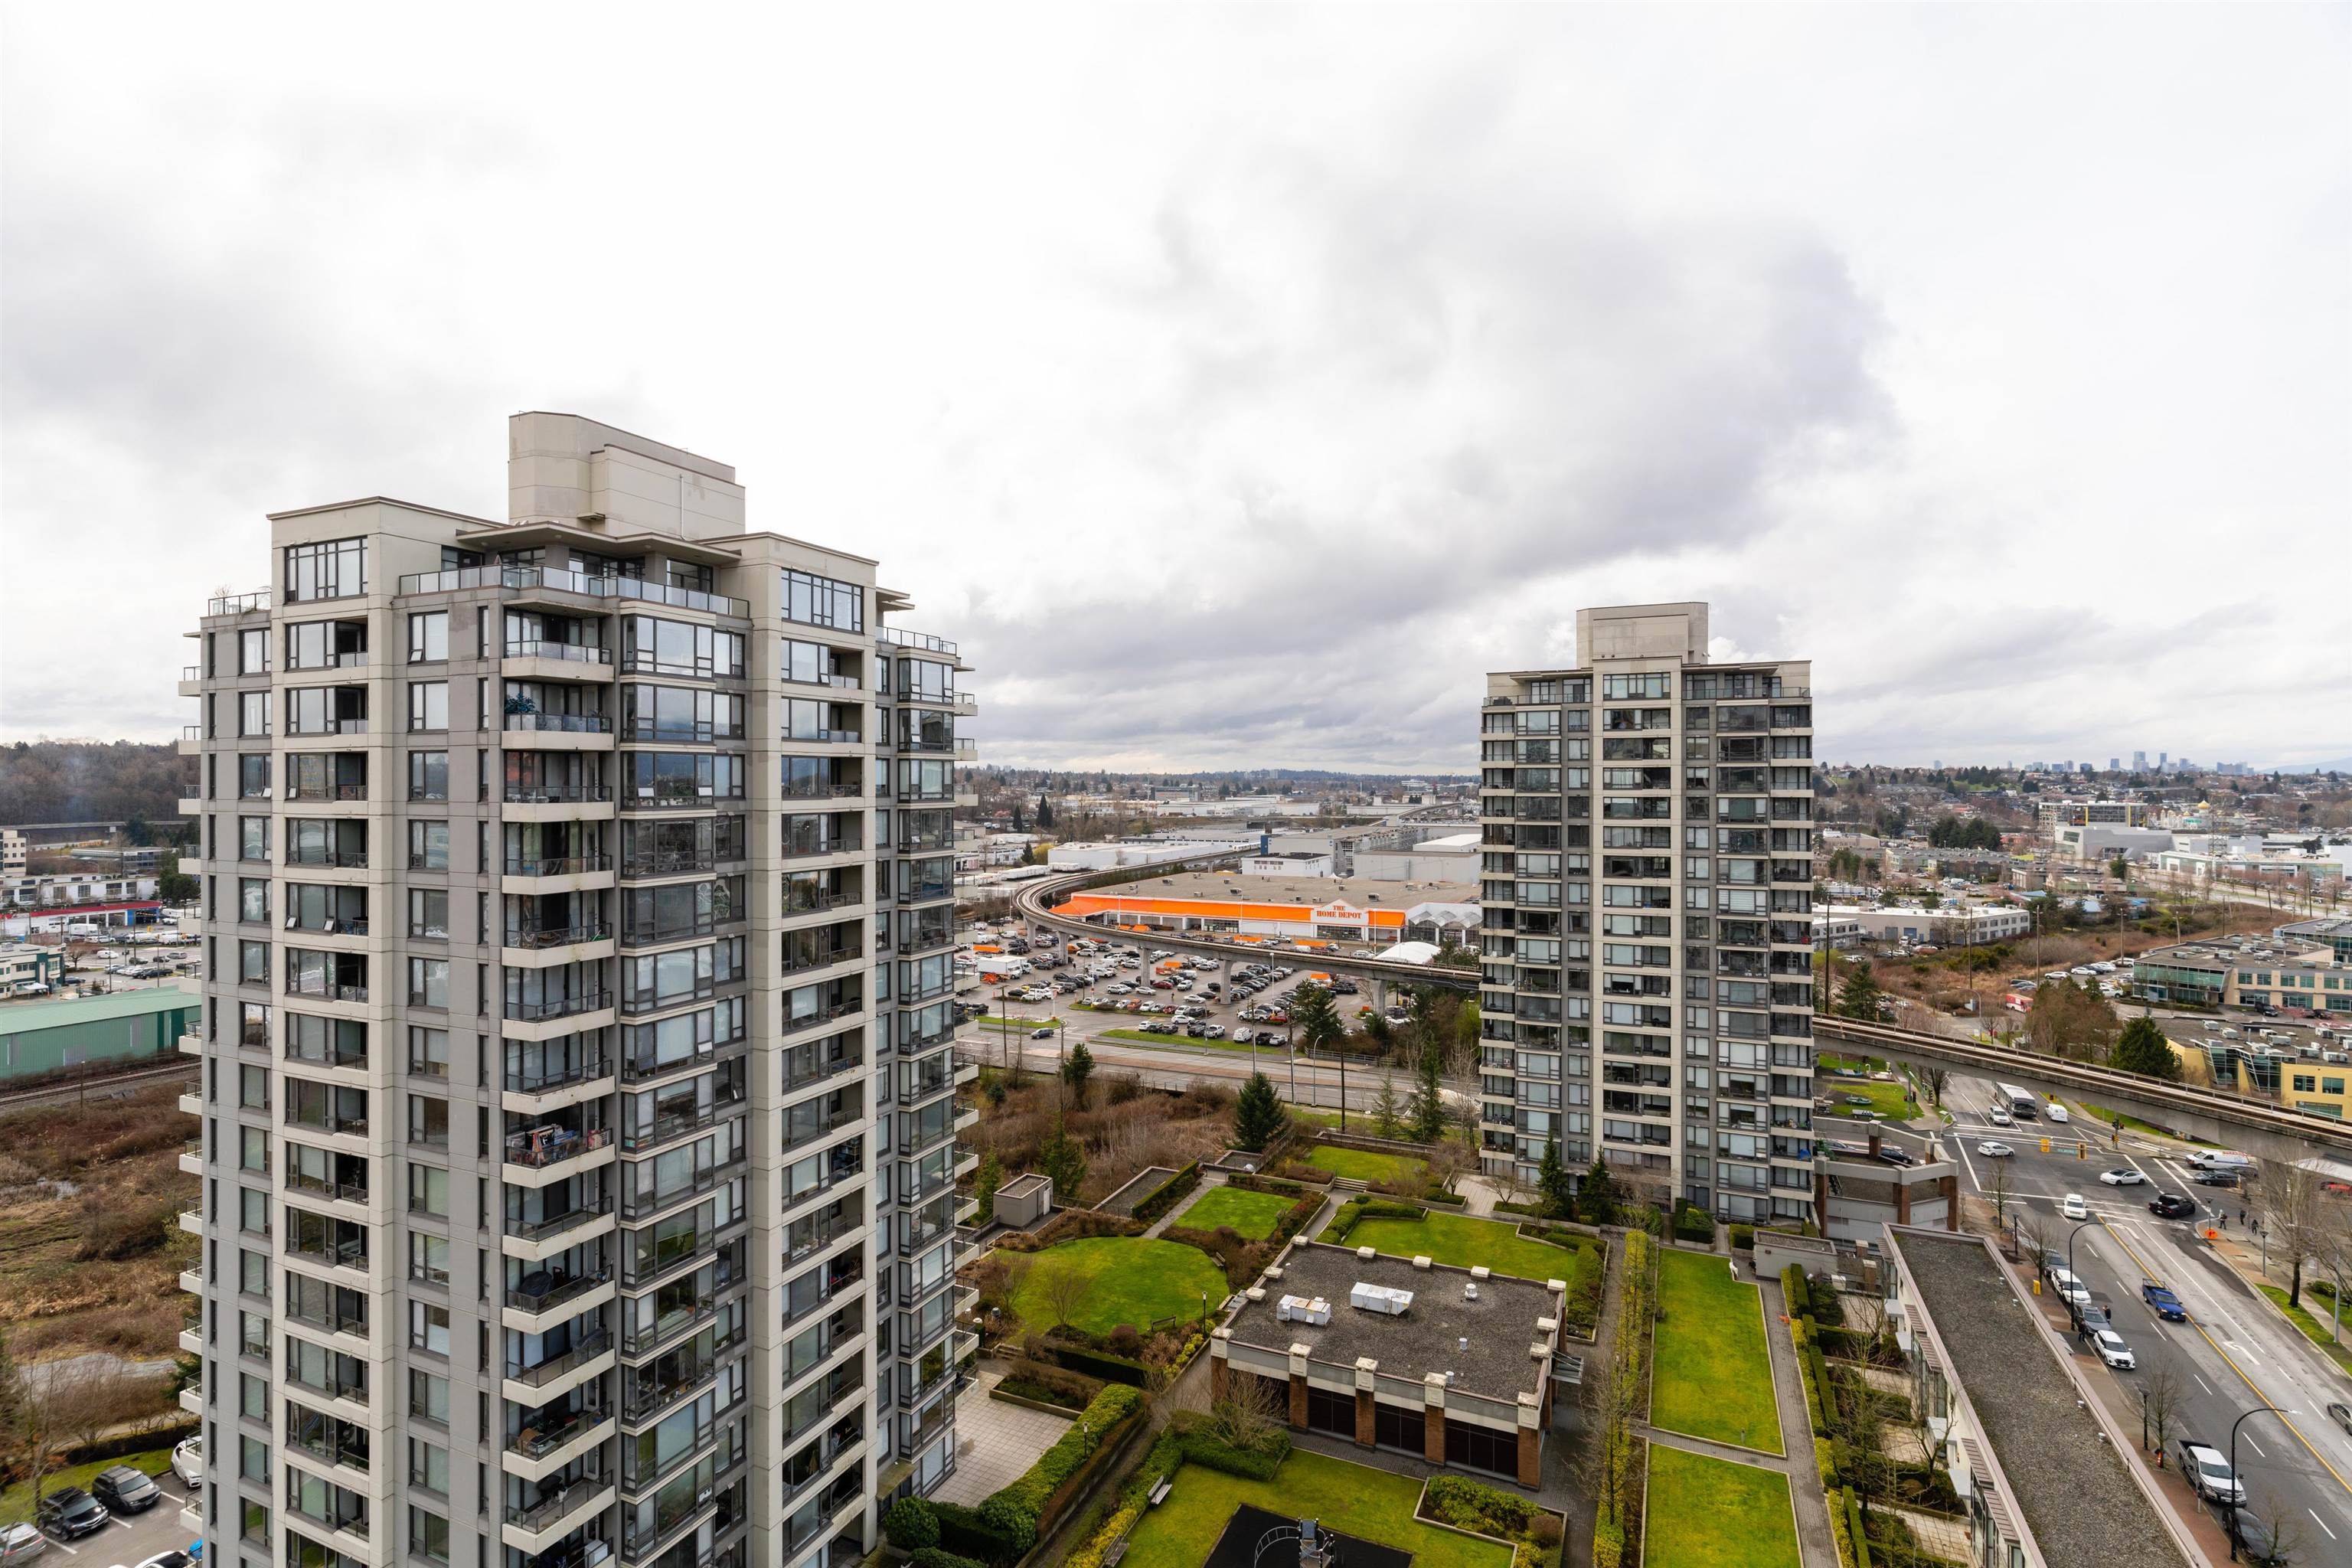 Photo 9: Photos: 1805 4182 DAWSON STREET in Burnaby: Brentwood Park Condo for sale (Burnaby North)  : MLS®# R2667648